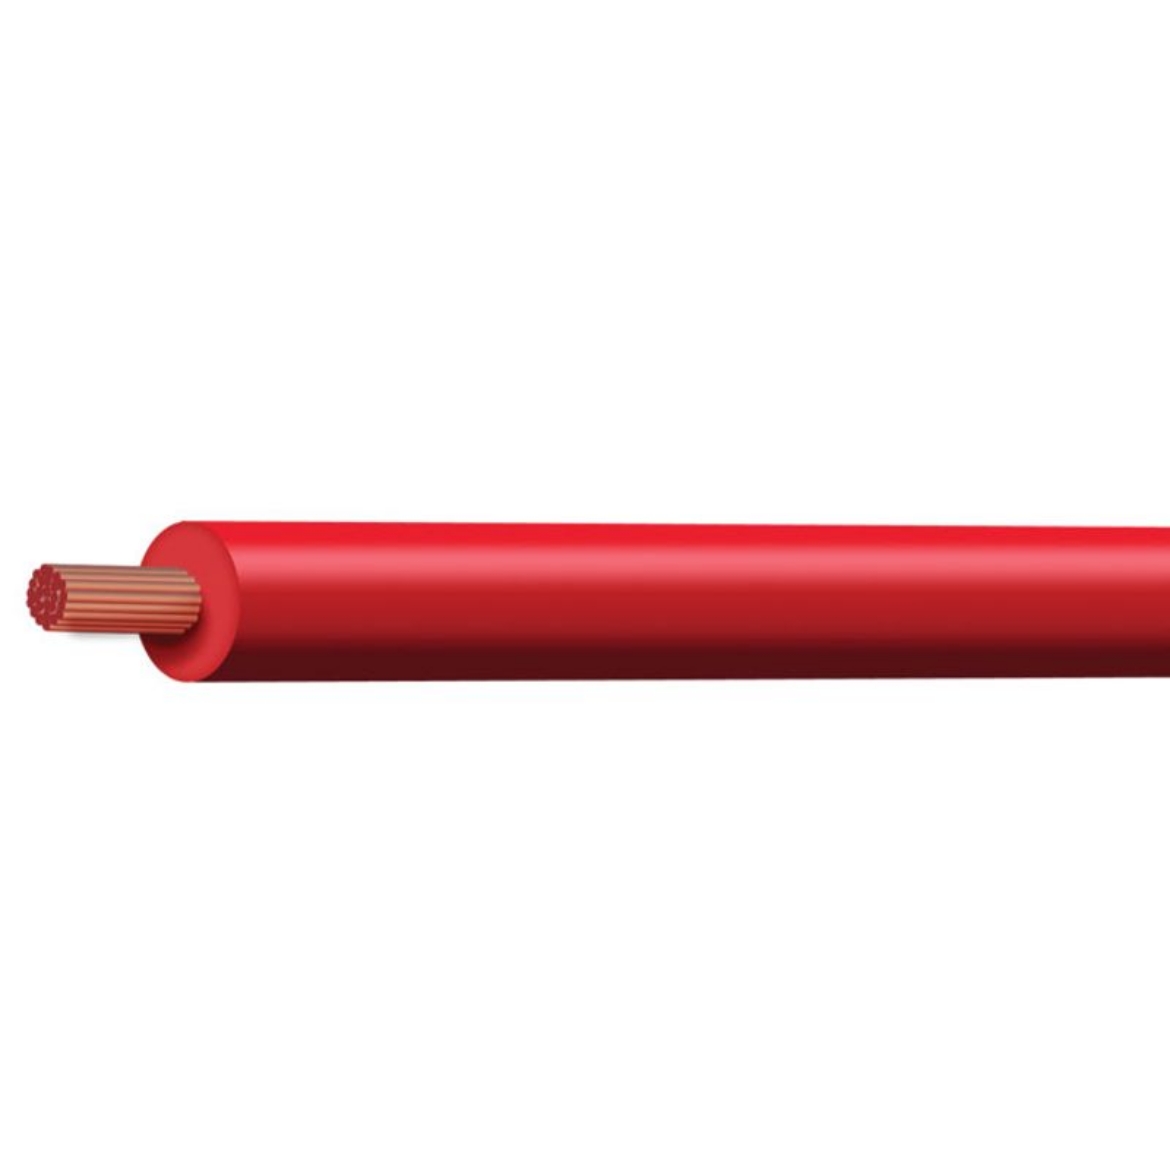 Picture of TYCAB 4MM SINGLE CORE CABLE 15A RED - 30M ROLL